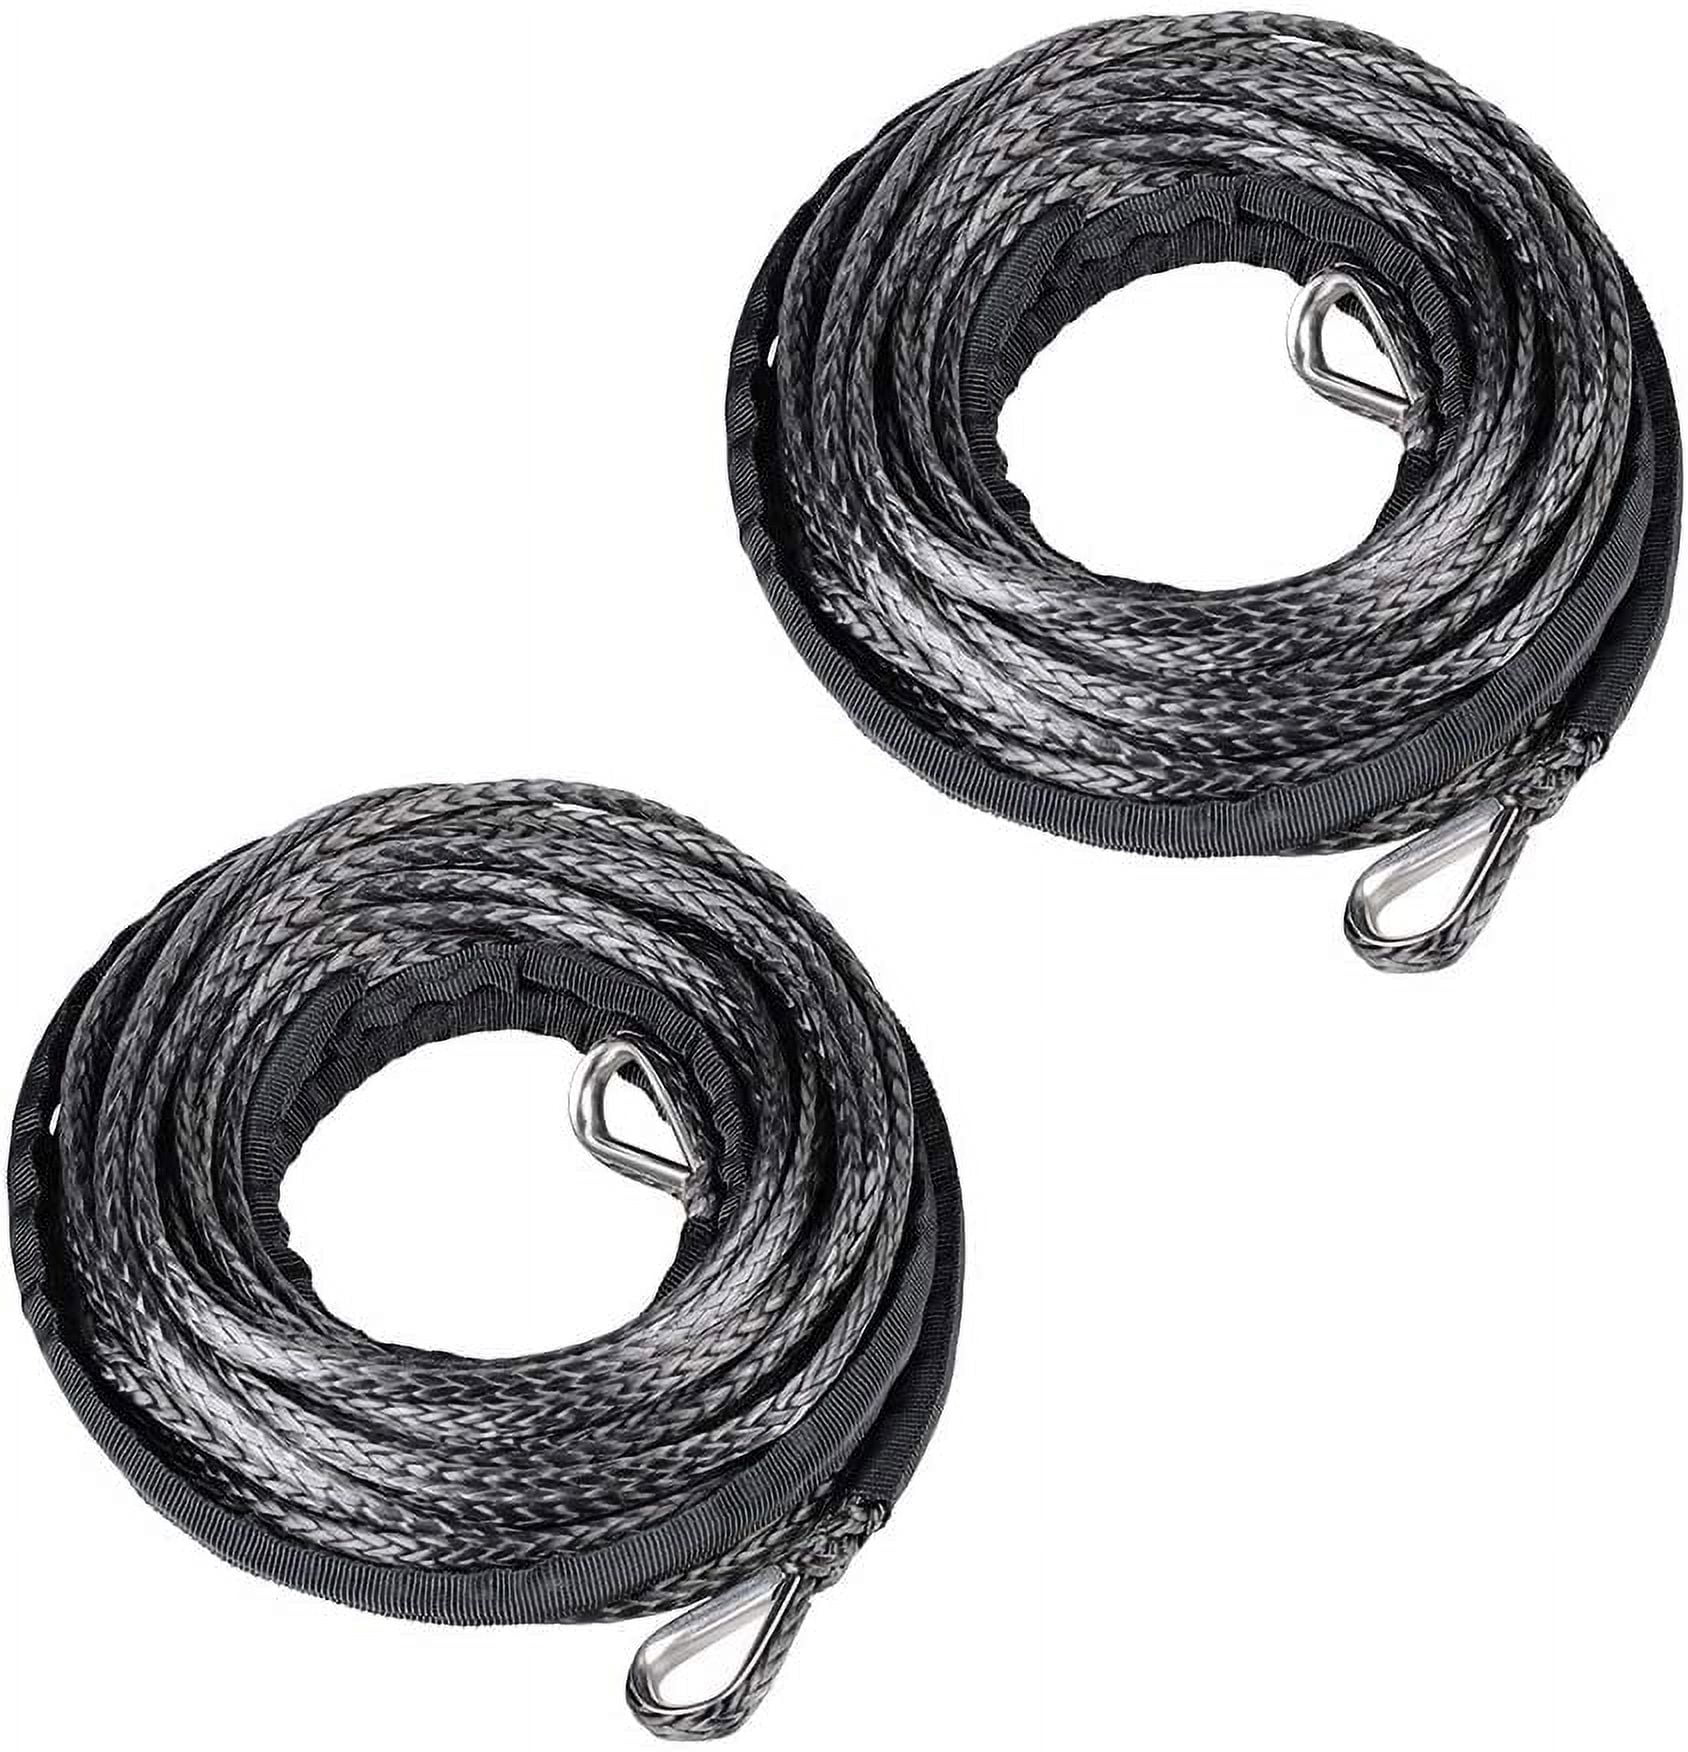 1/4 x 50' UHMWPE Synthetic Winch Rope Extension Loop Ends for ATV